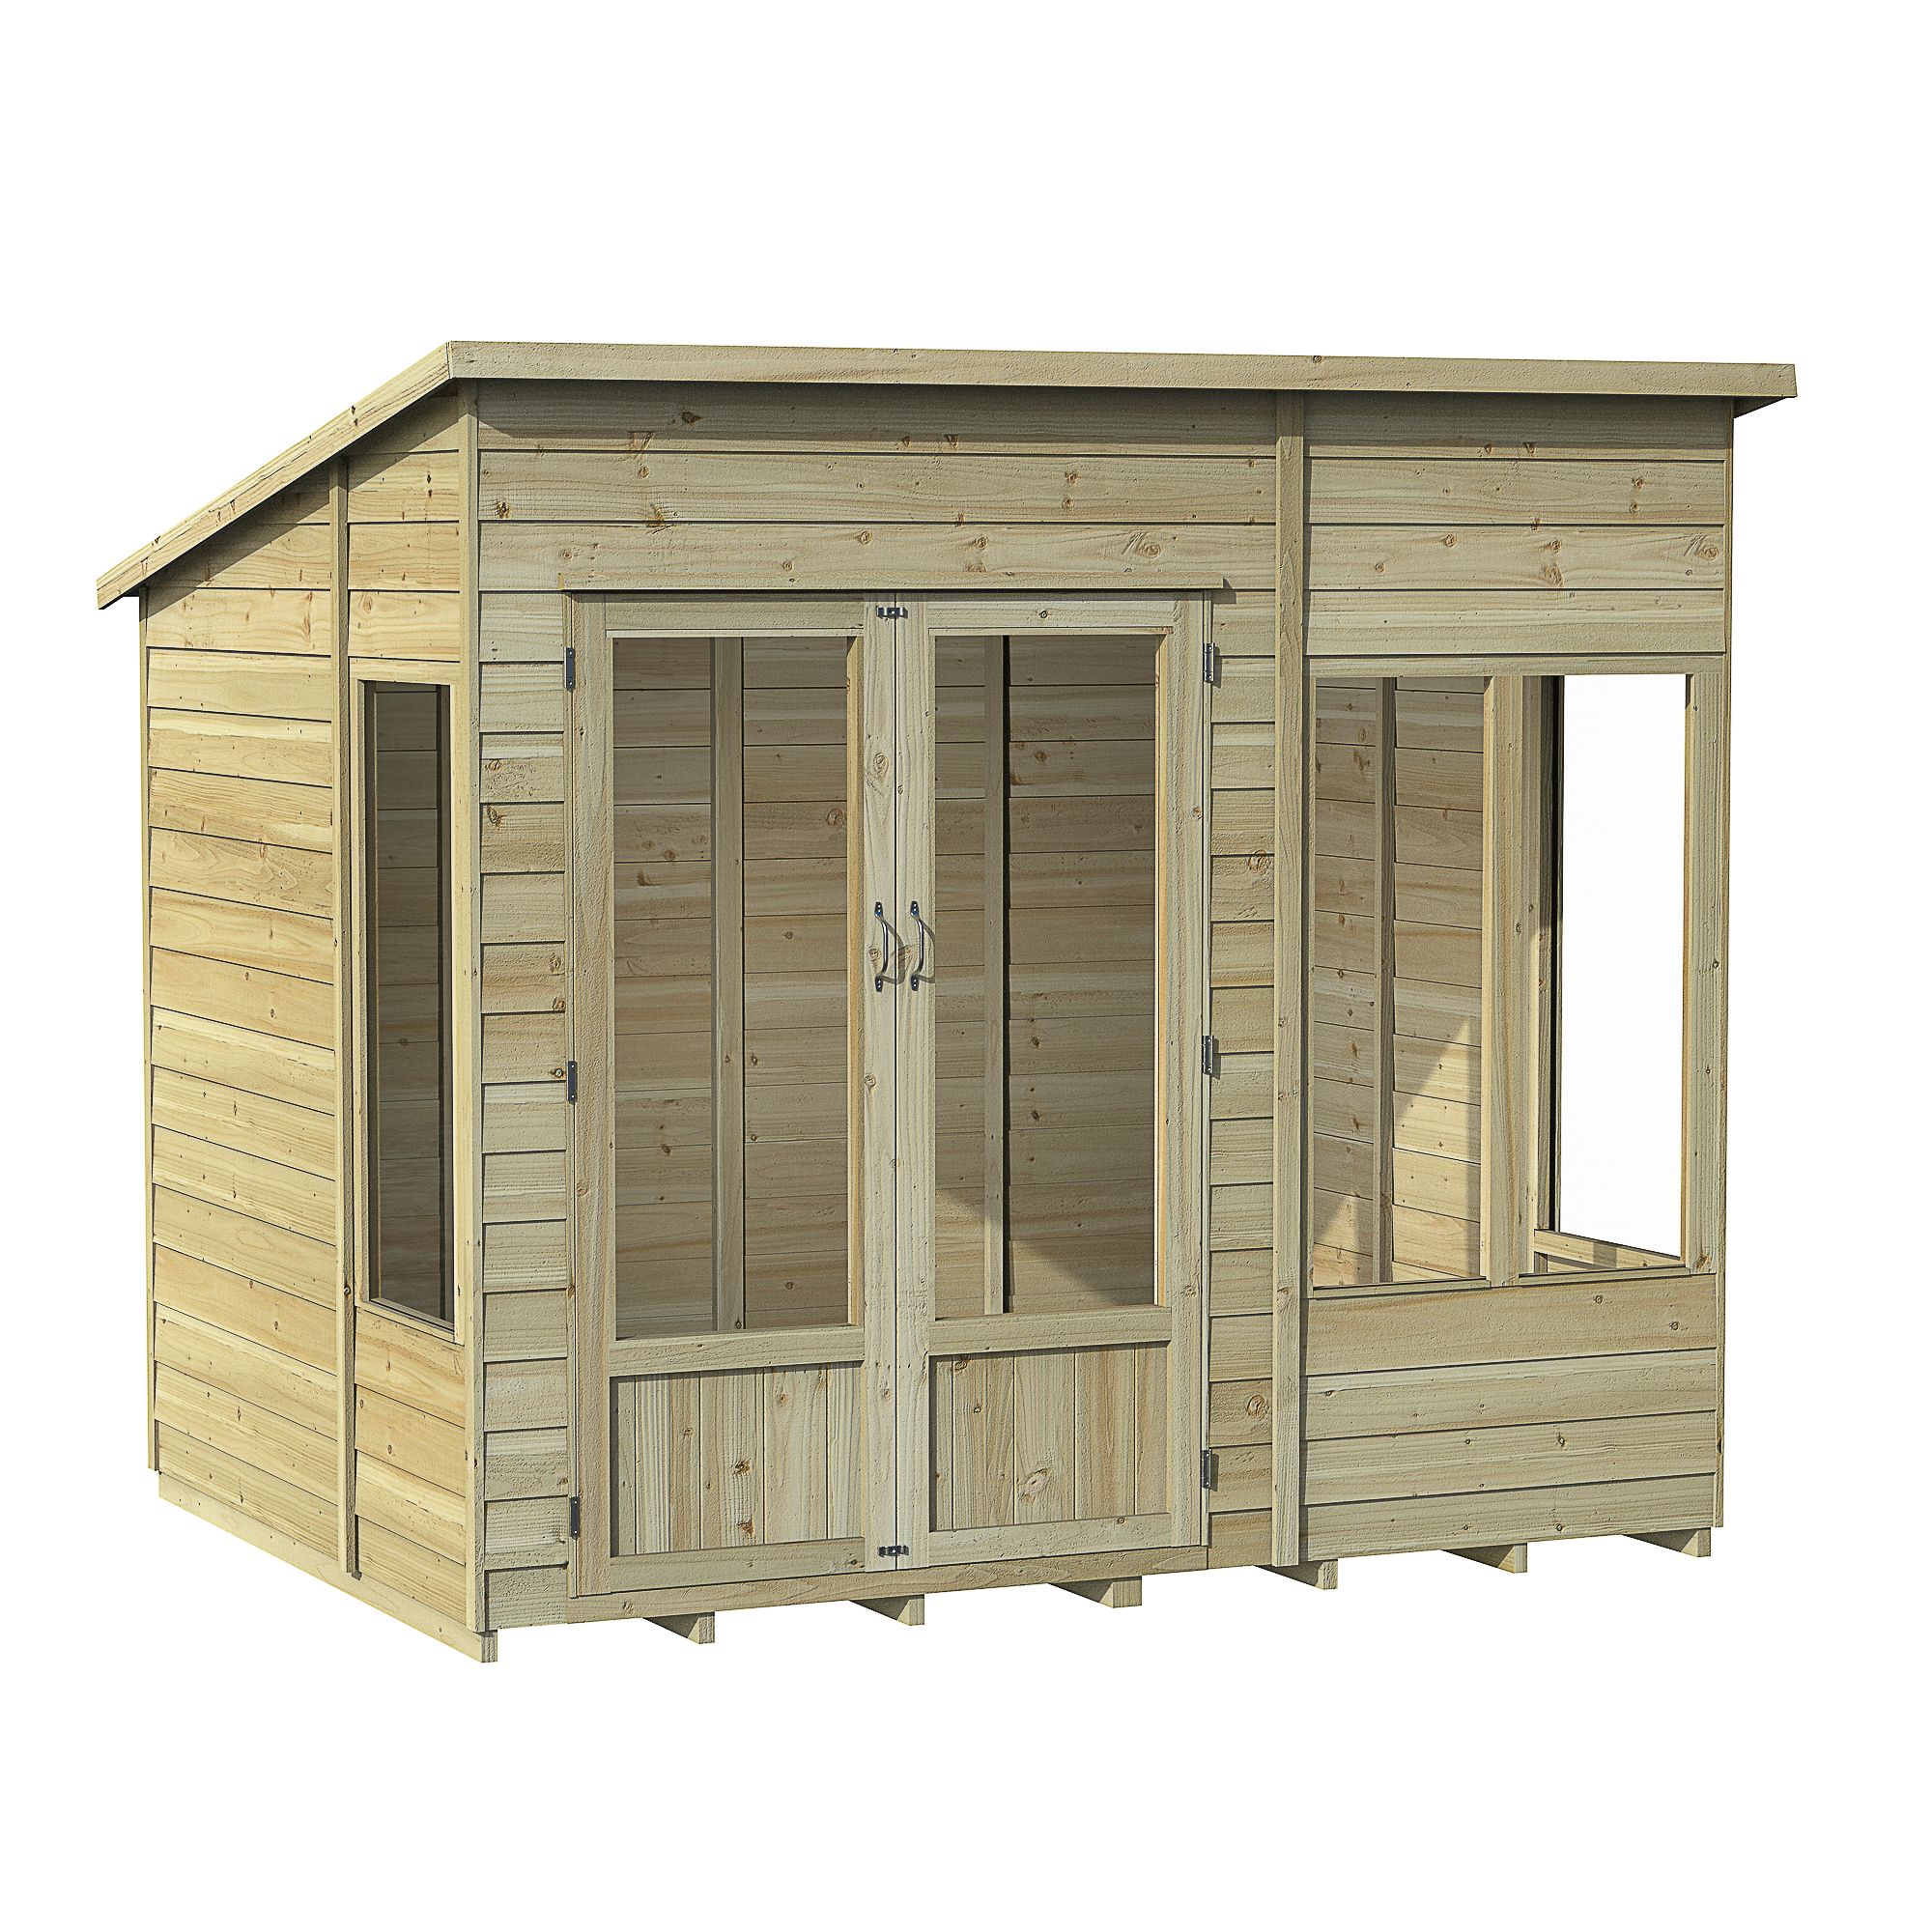 Forest Garden Oakley 8x6 ft with Double door & 4 windows Pent Wooden Summer house - Assembly service included